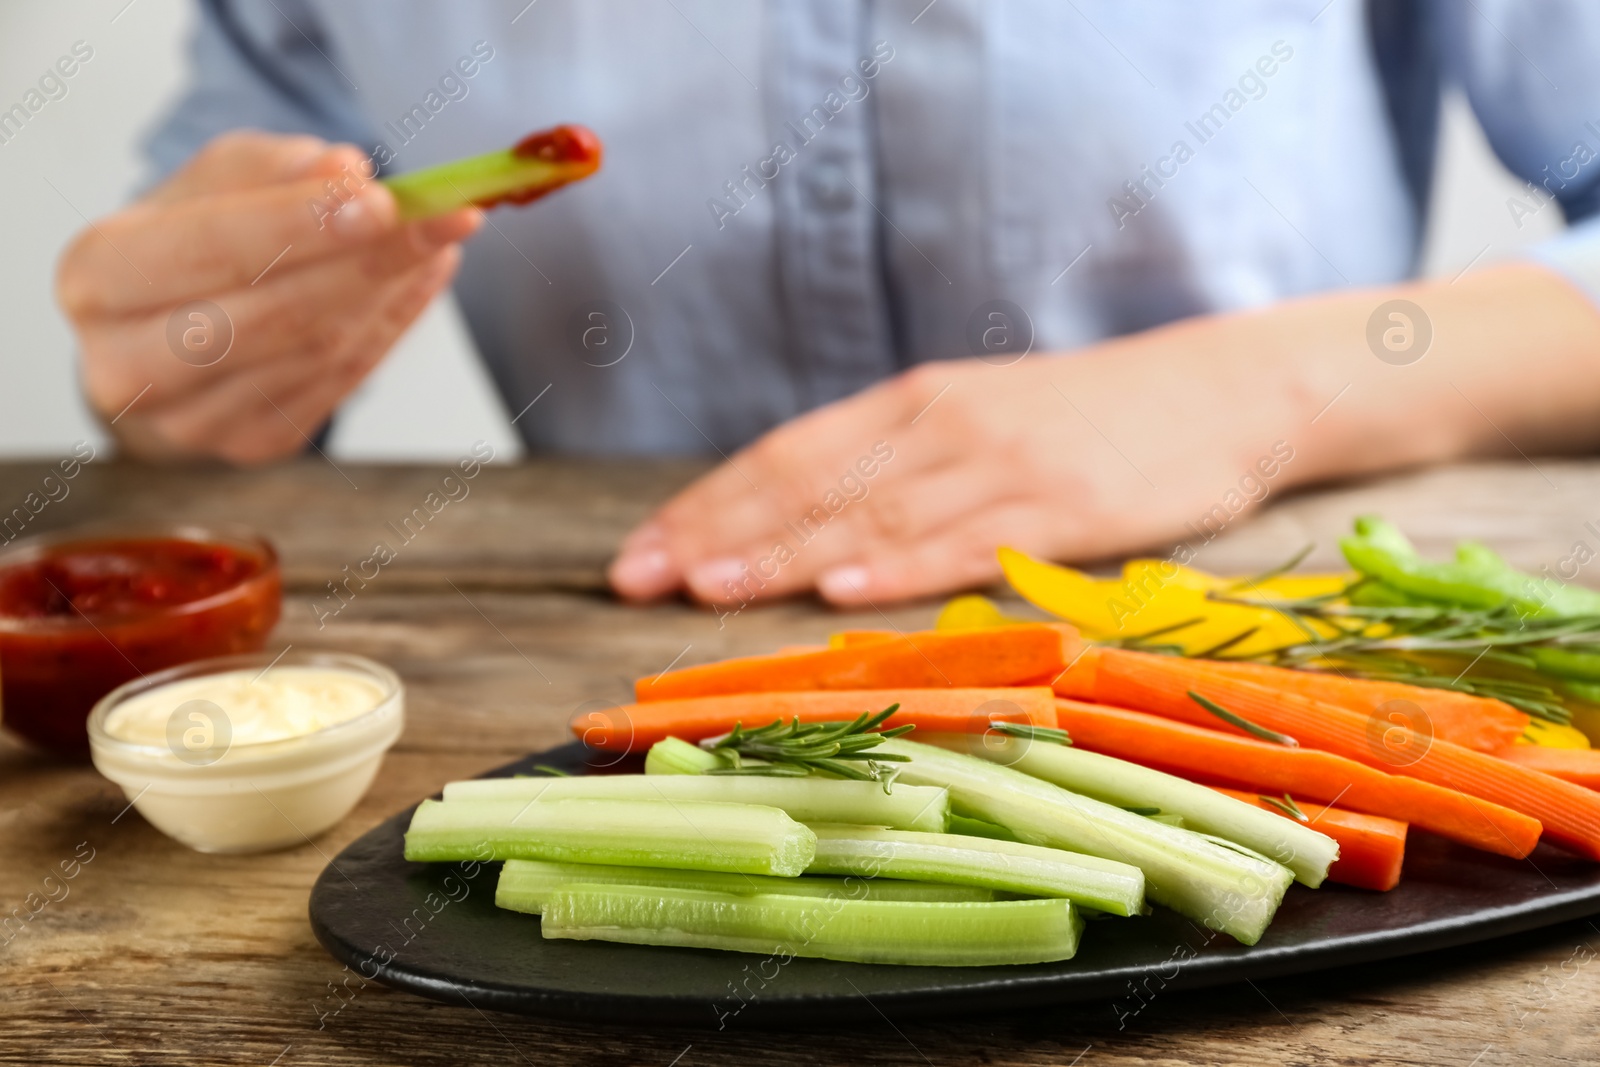 Photo of Plate with celery sticks, other vegetables and different dip sauces on wooden table, closeup